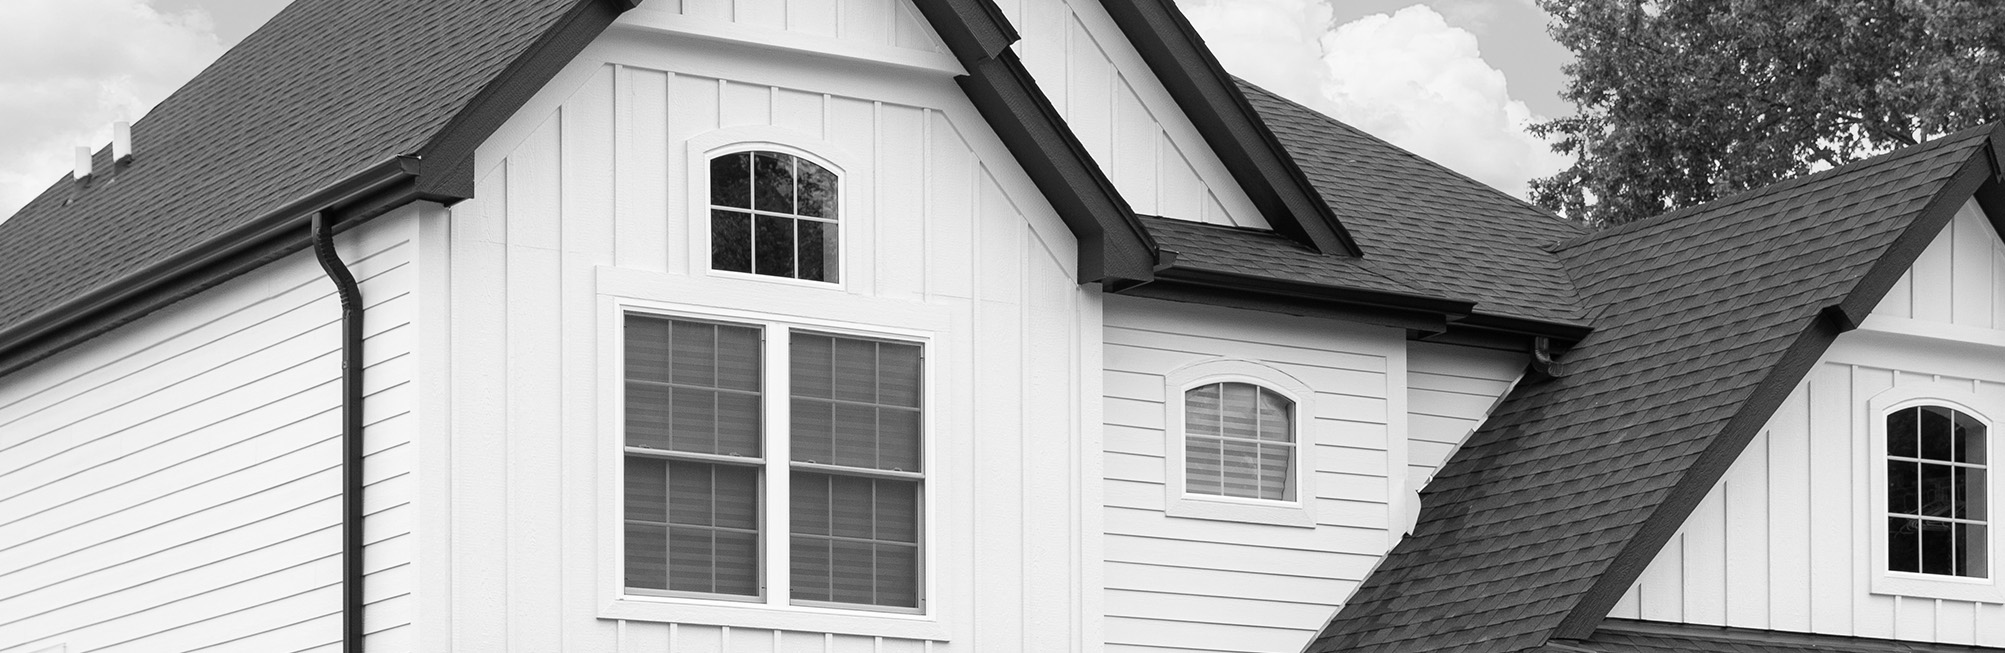 Professionally installed white siding using industry-leading siding boards